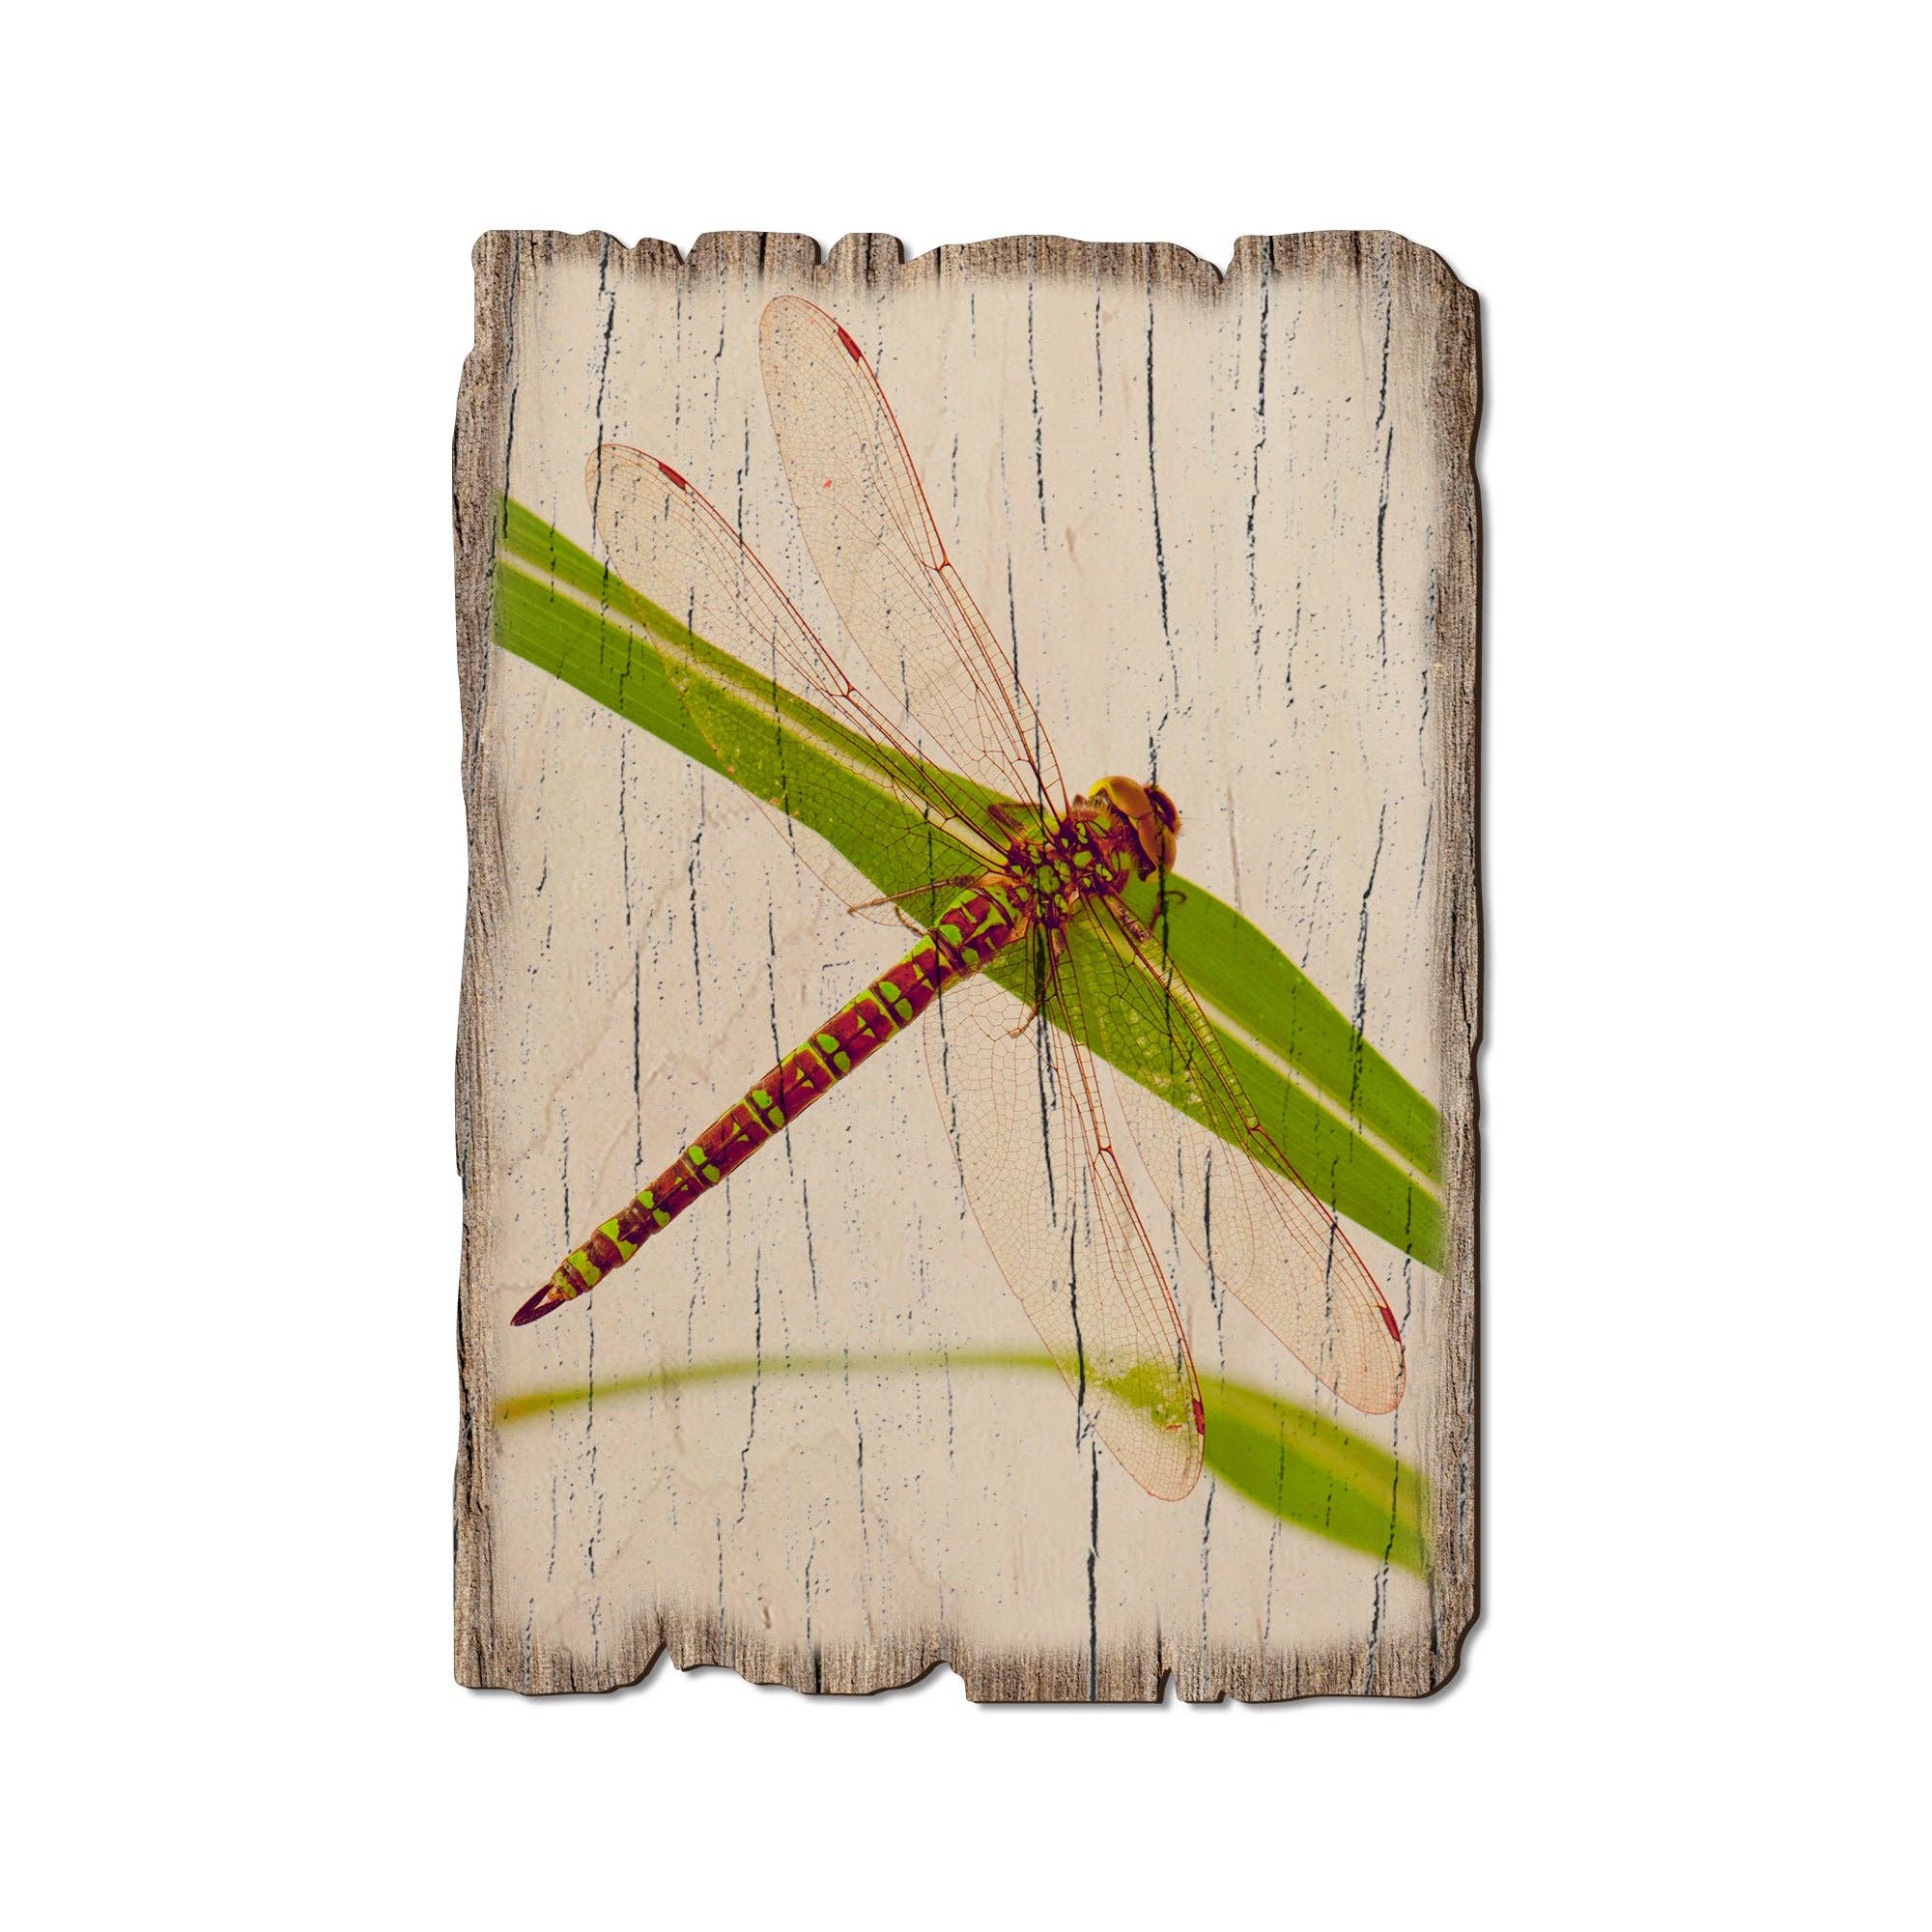 DaydreamHQ - Green Dragonfly -  Rustic Wood Insect Postcards